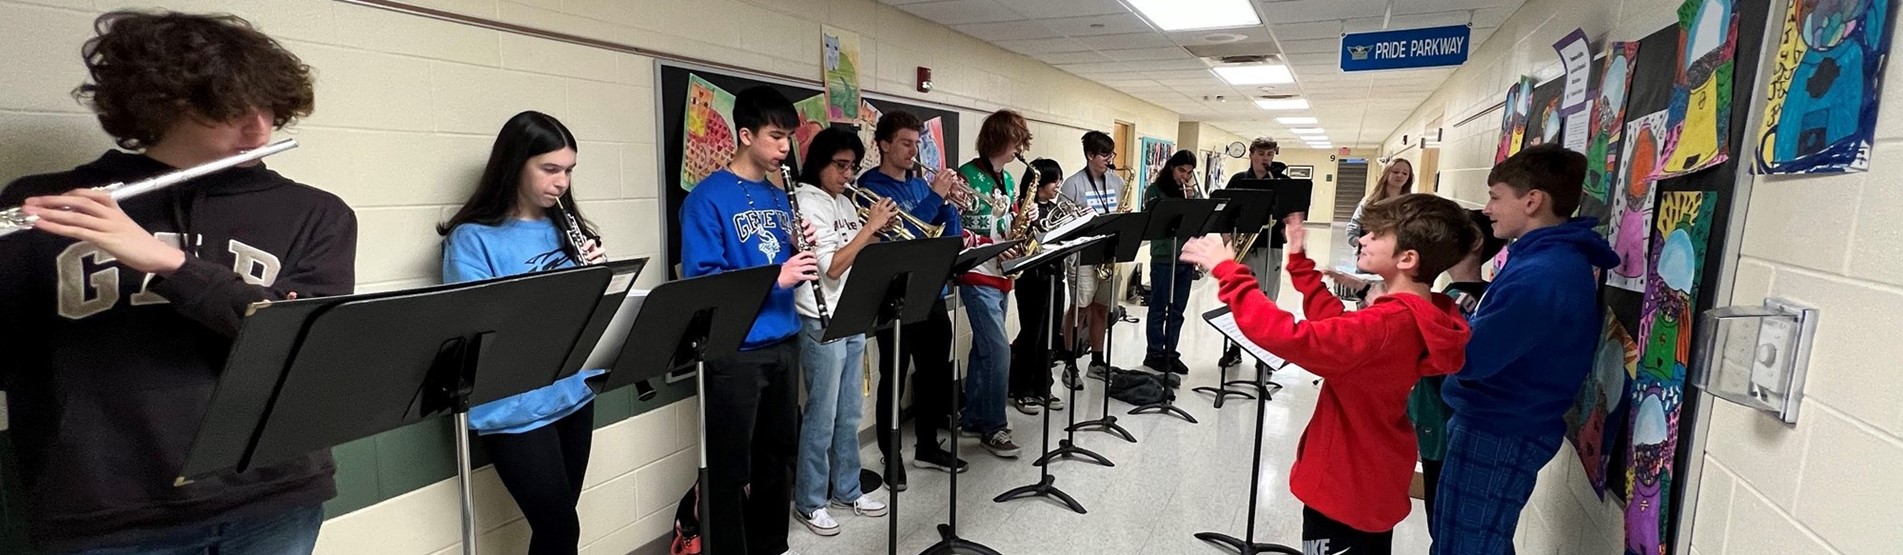 GHS band visits middle school